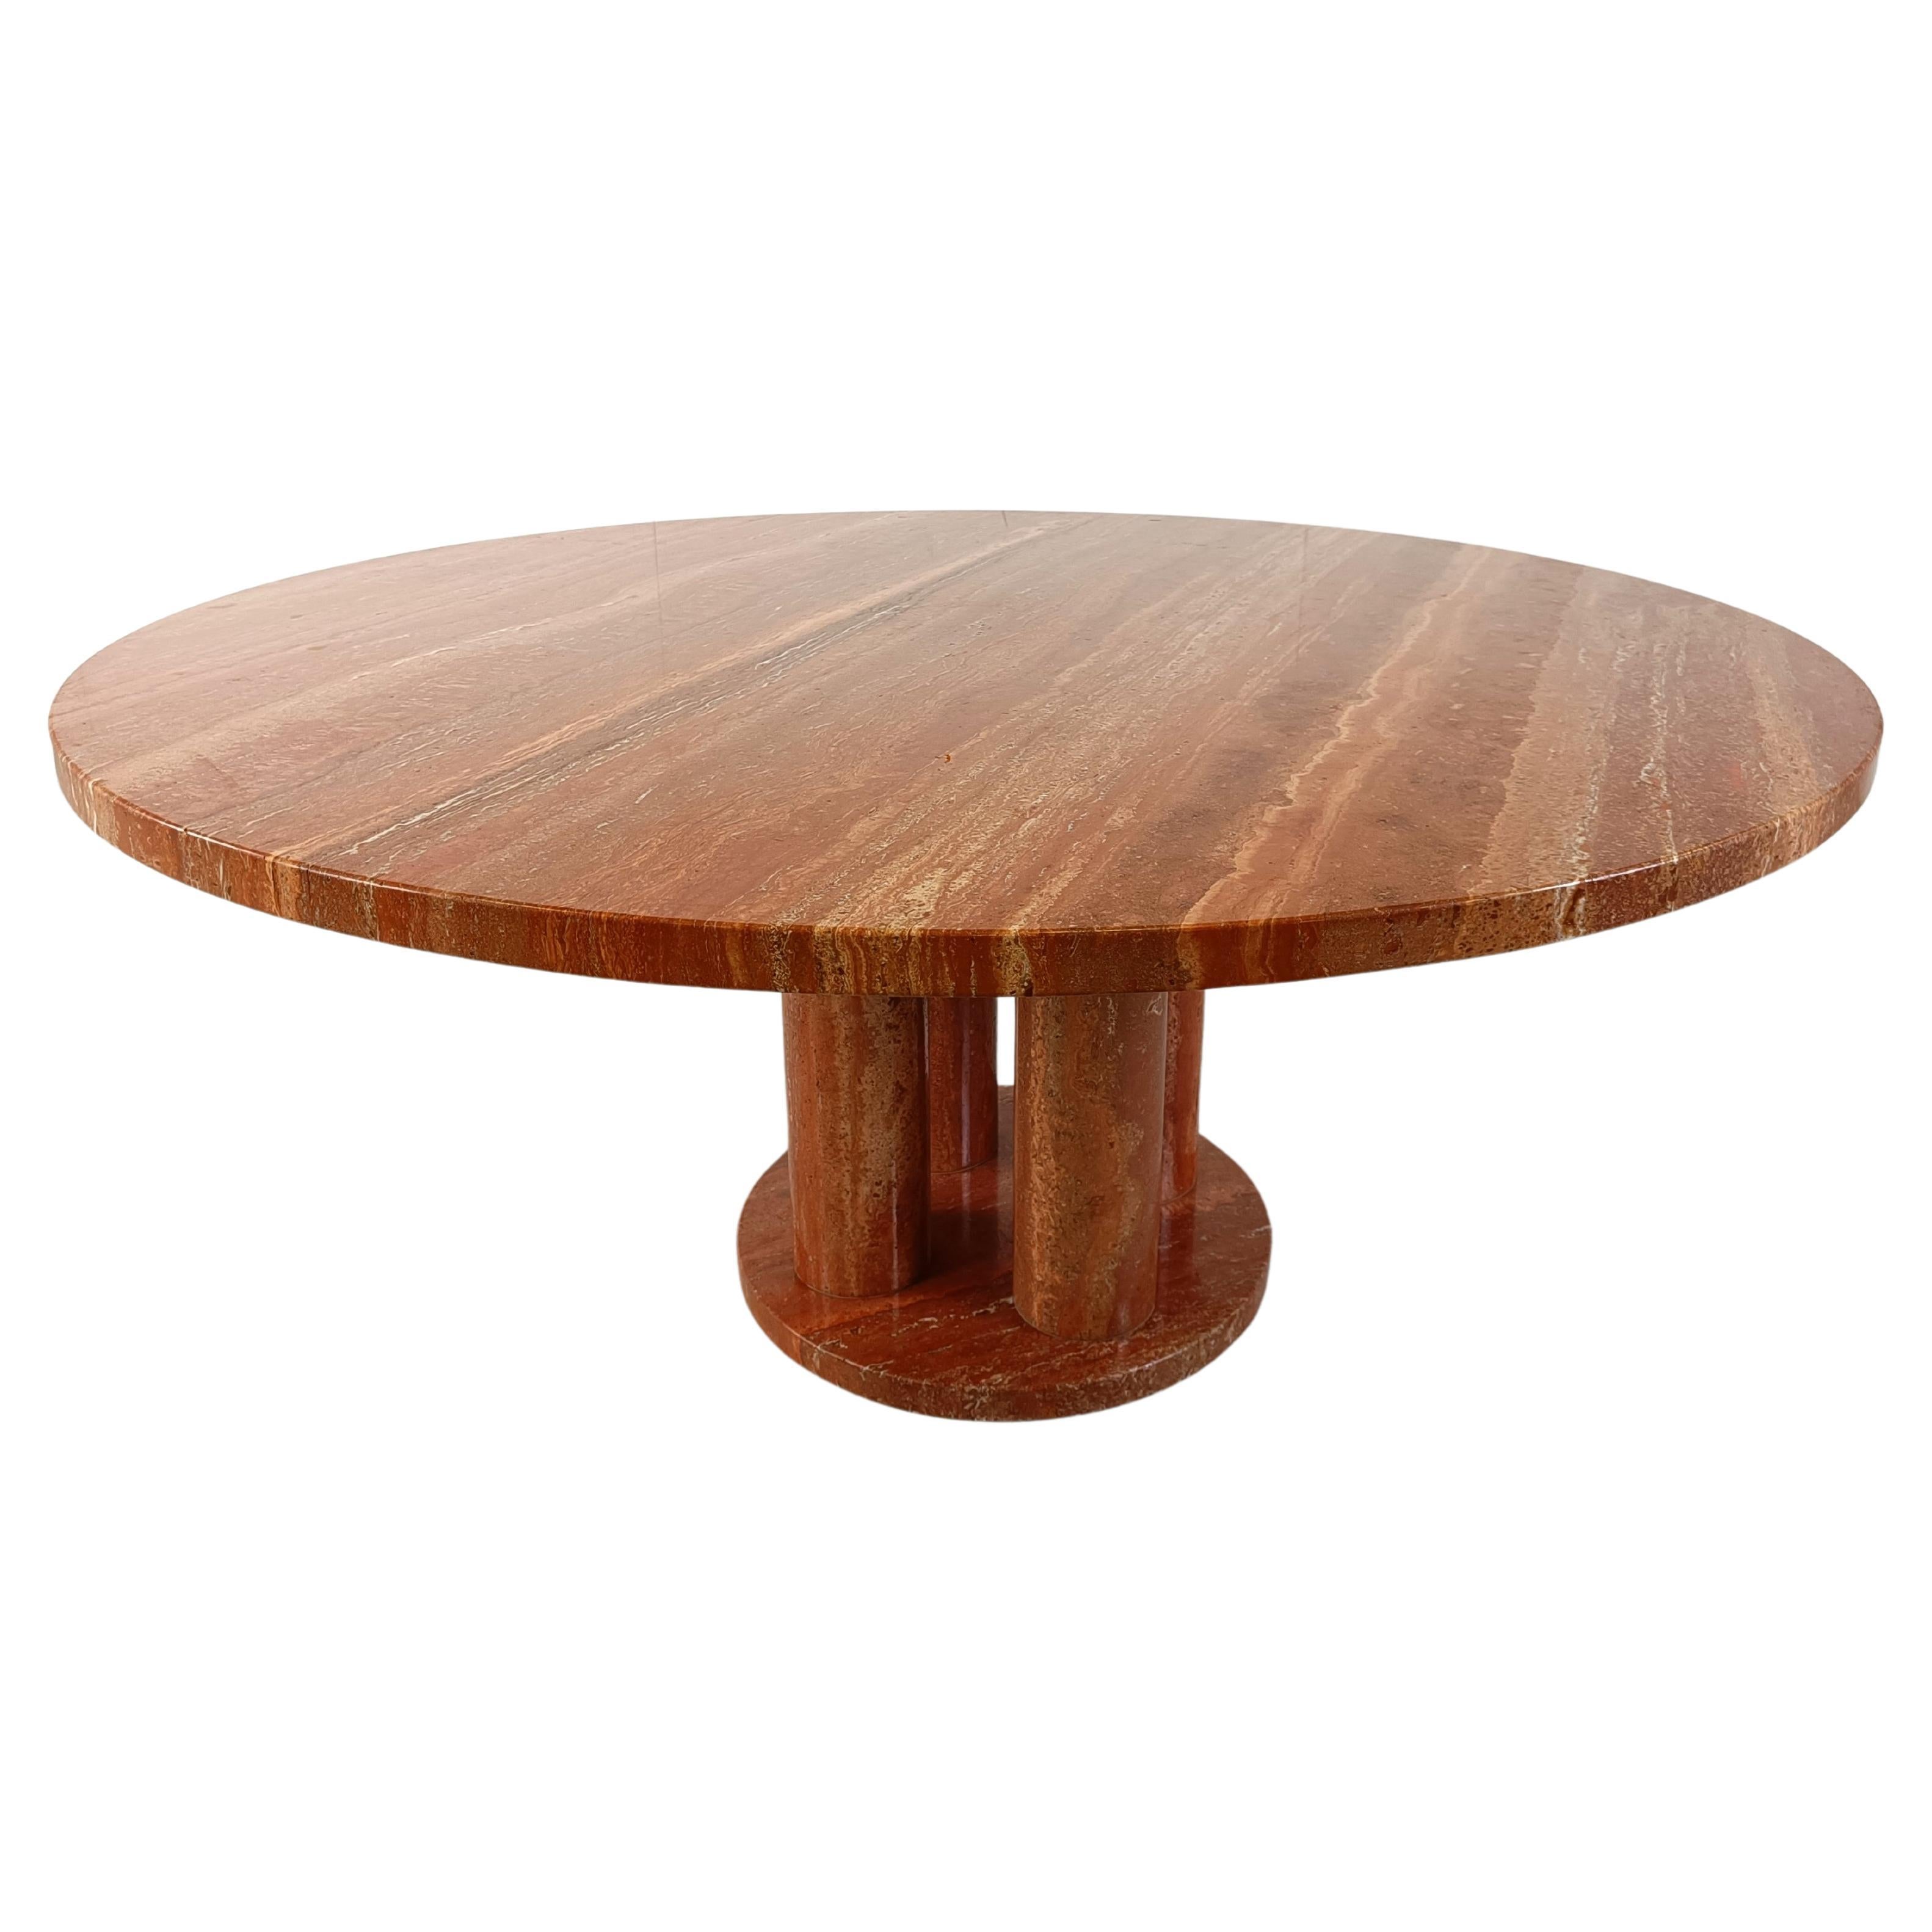 Large red travertine round dining table, 1970s